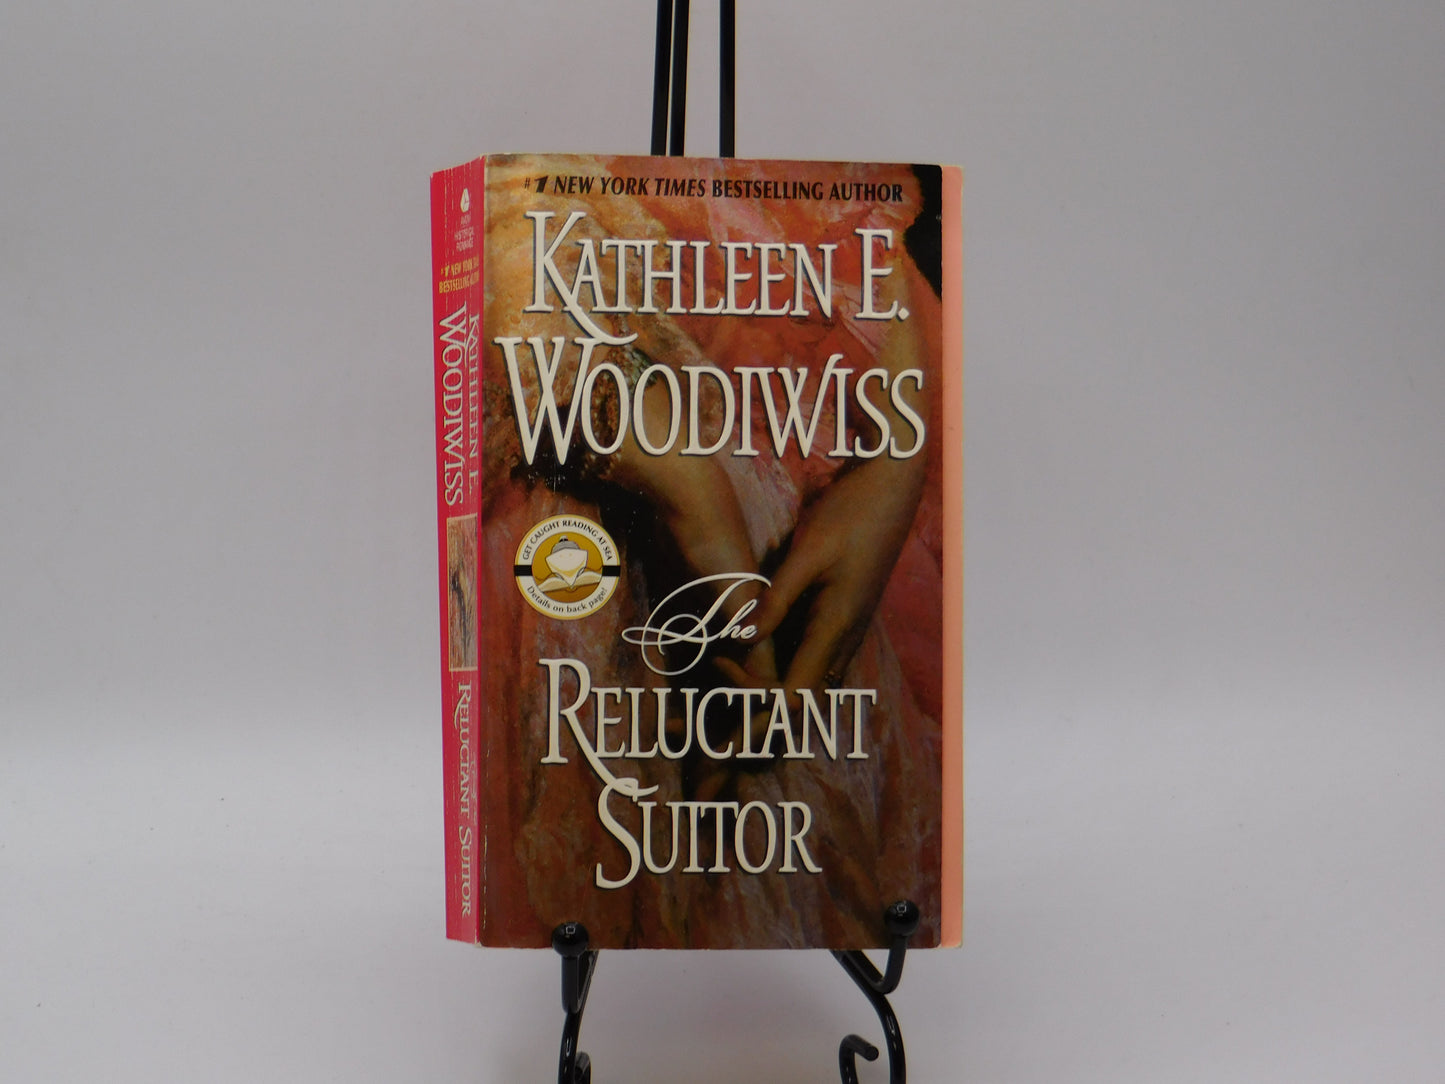 The Reluctant Suitor by Kathleen Woodiwiss